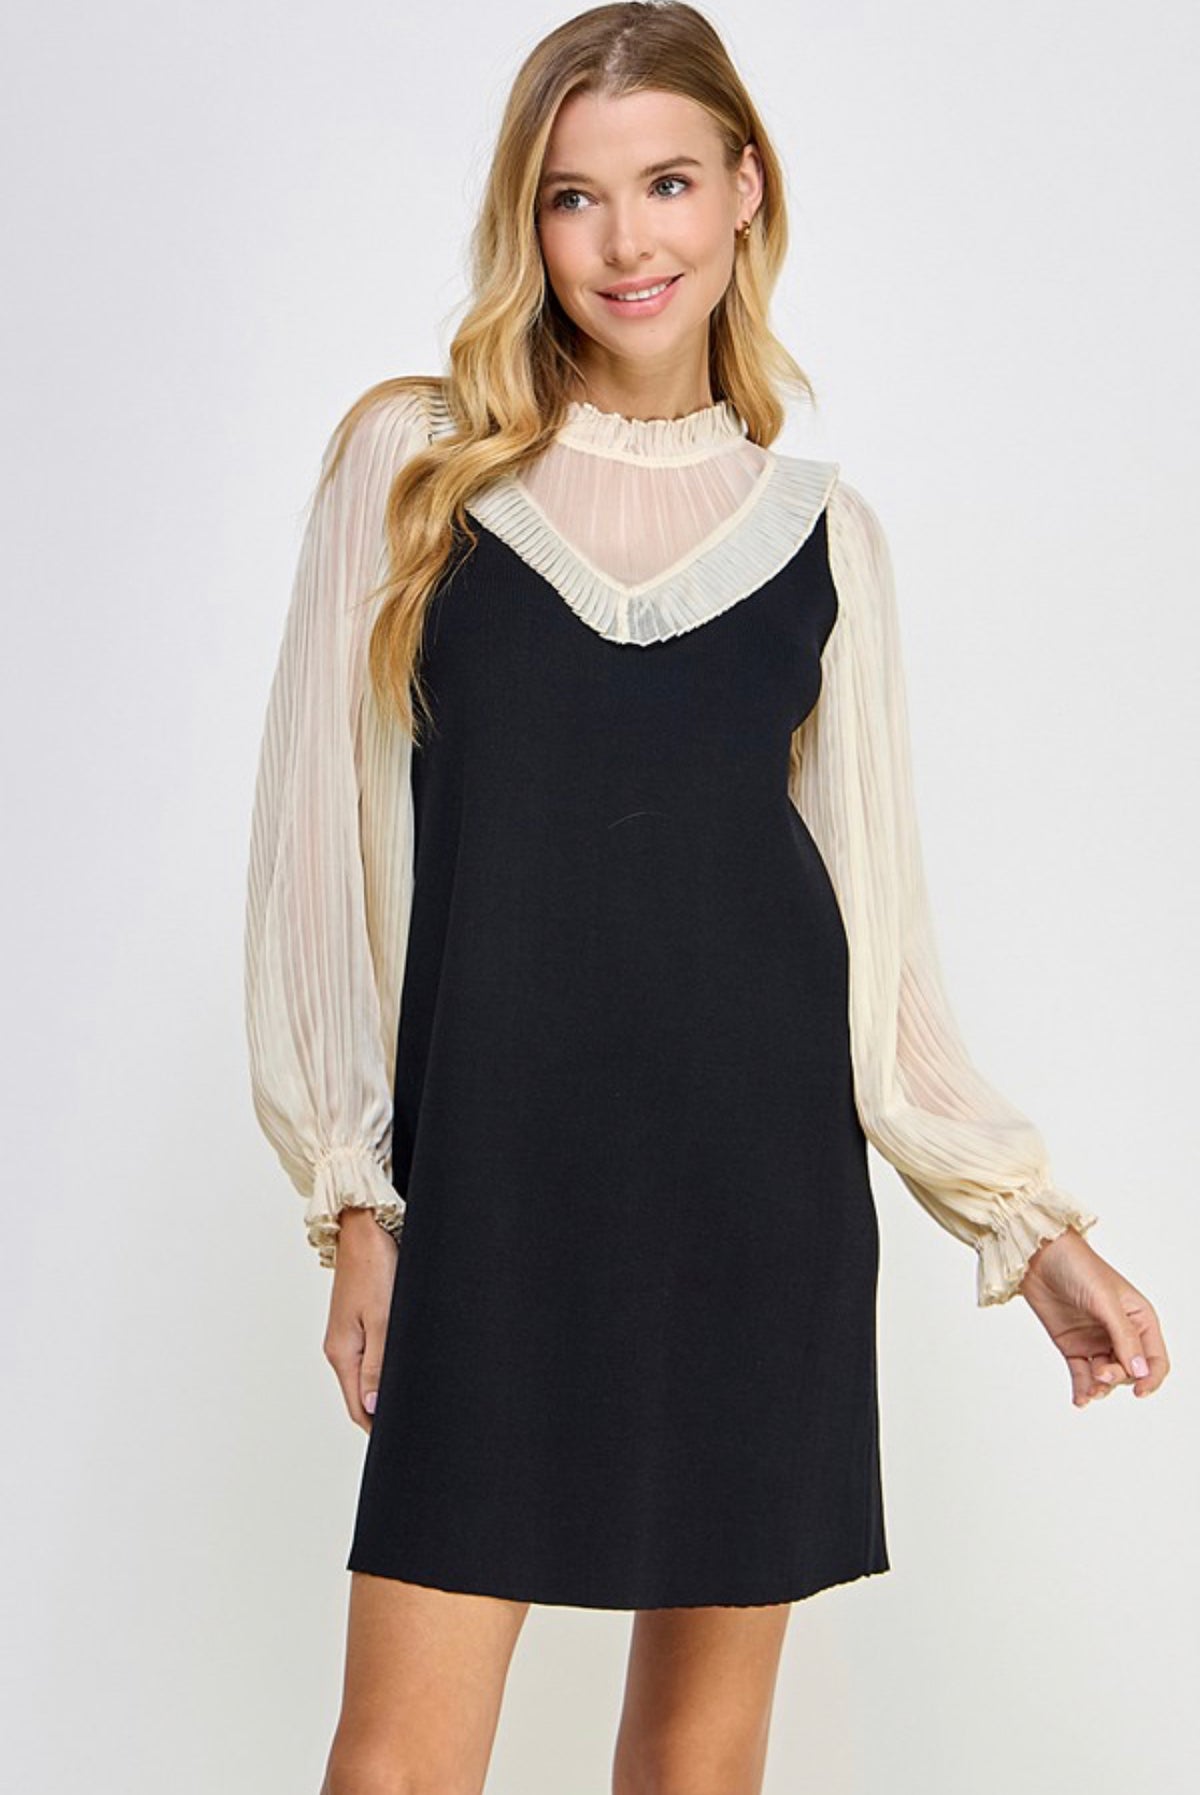 CREAM AND BLACK PLEATED BLOUSE DRESS